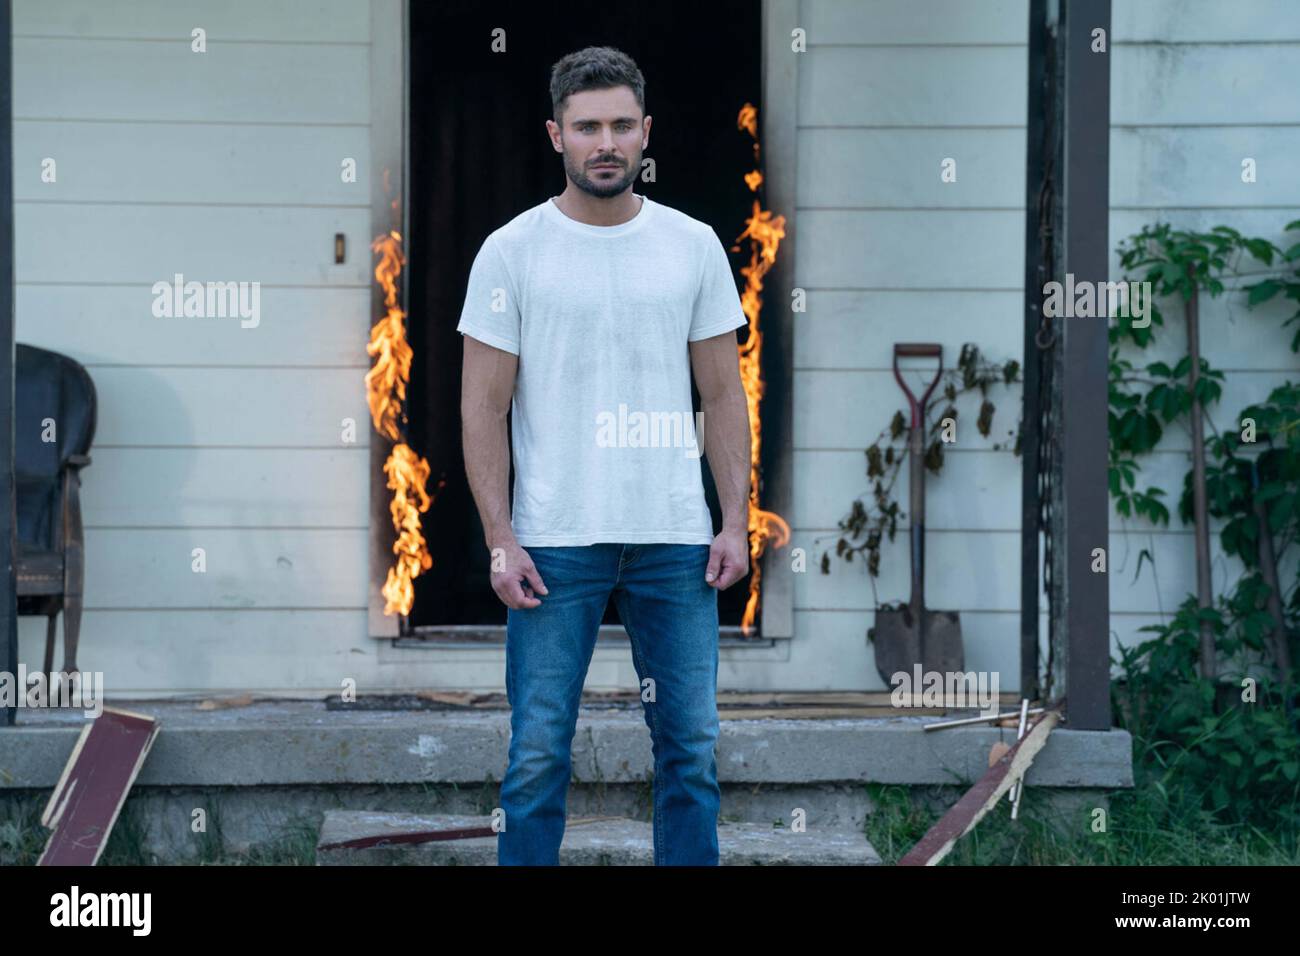 FIRESTARTER (2022) ZAC EFRON KEITH THOMAS (DIR) UNIVERSAL PICTURES/MOVIESTORE COLLECTION Banque D'Images